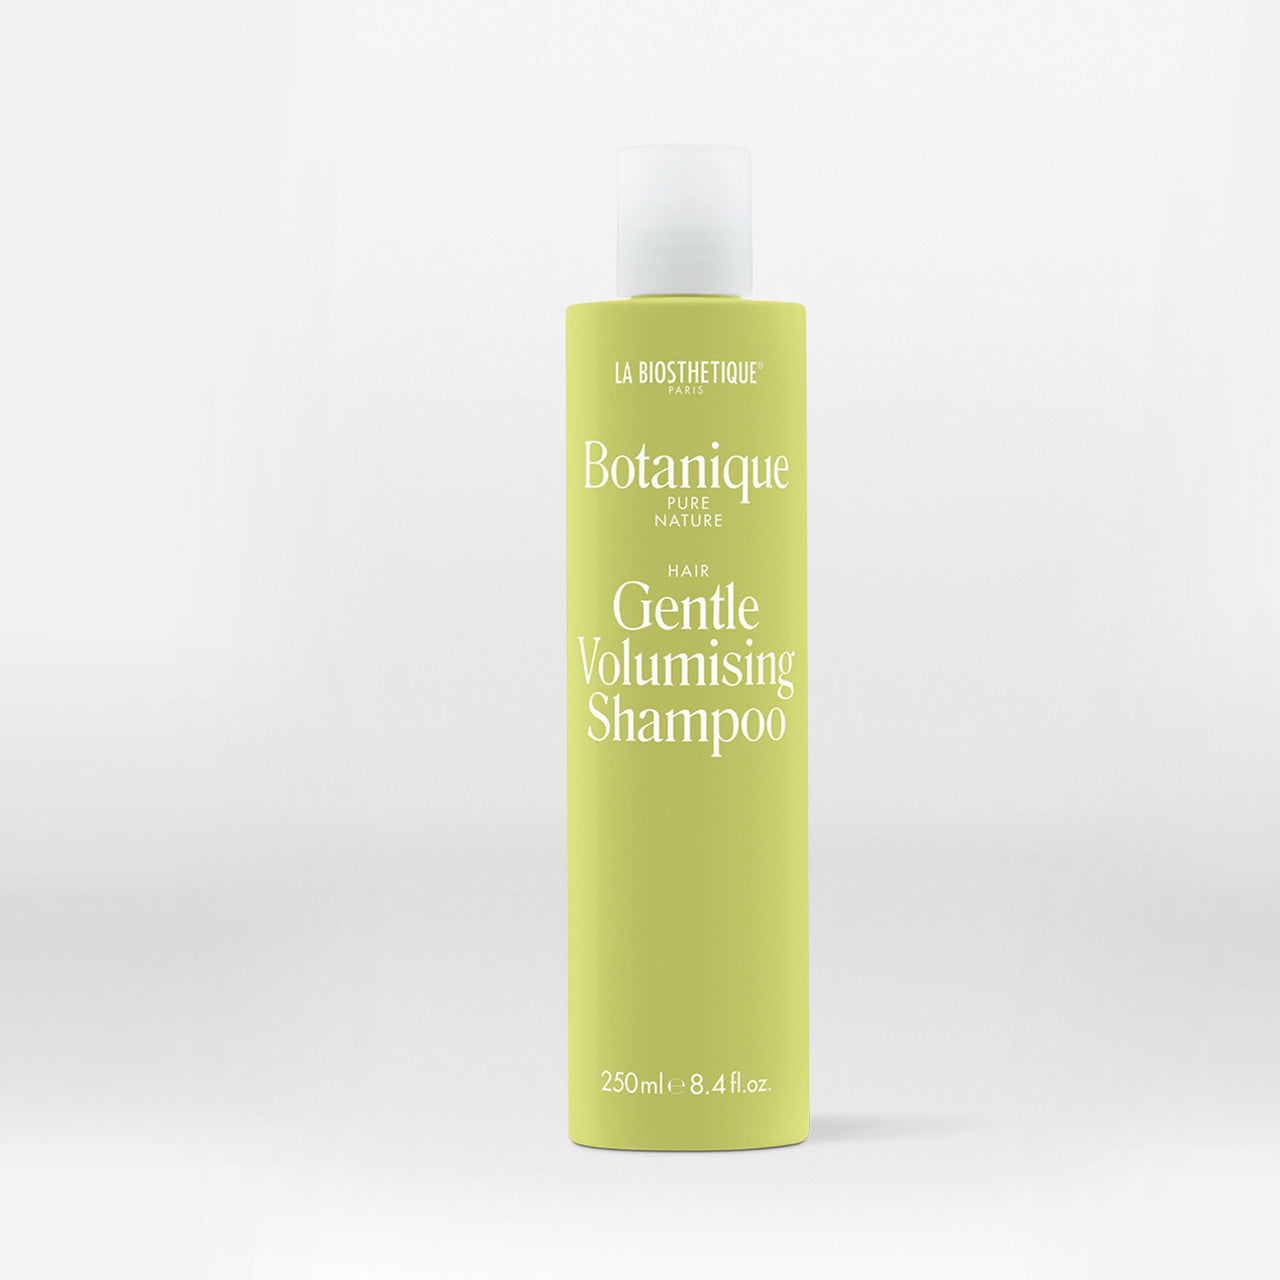 Botanique Gentle Volumising Shampoo Strengthening conditioning shampoo for normal hair with 100% natural ingredients.